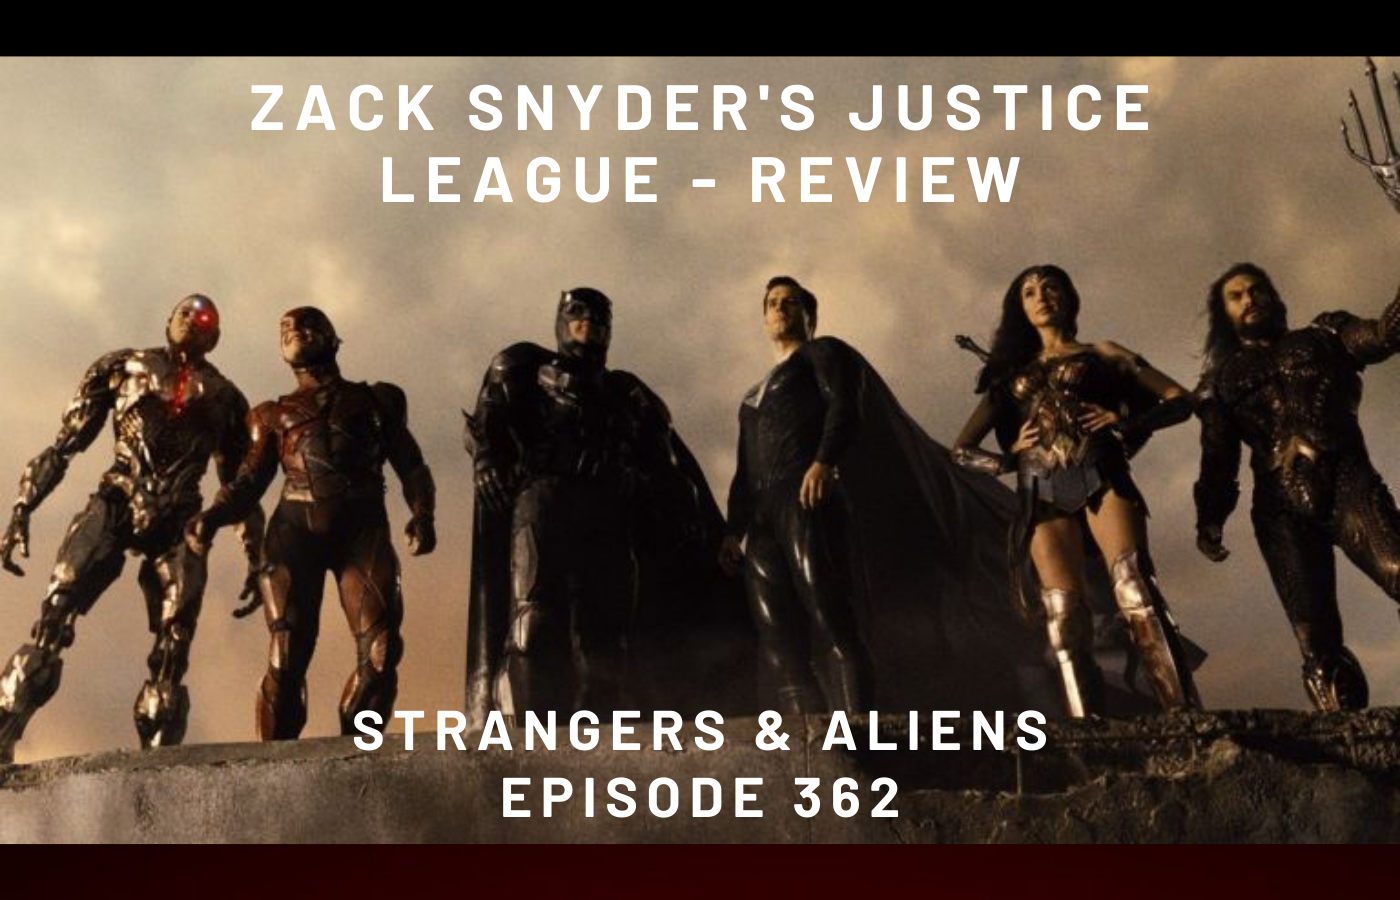 ZACK SNYDER’S JUSTICE LEAGUE Review – SA362